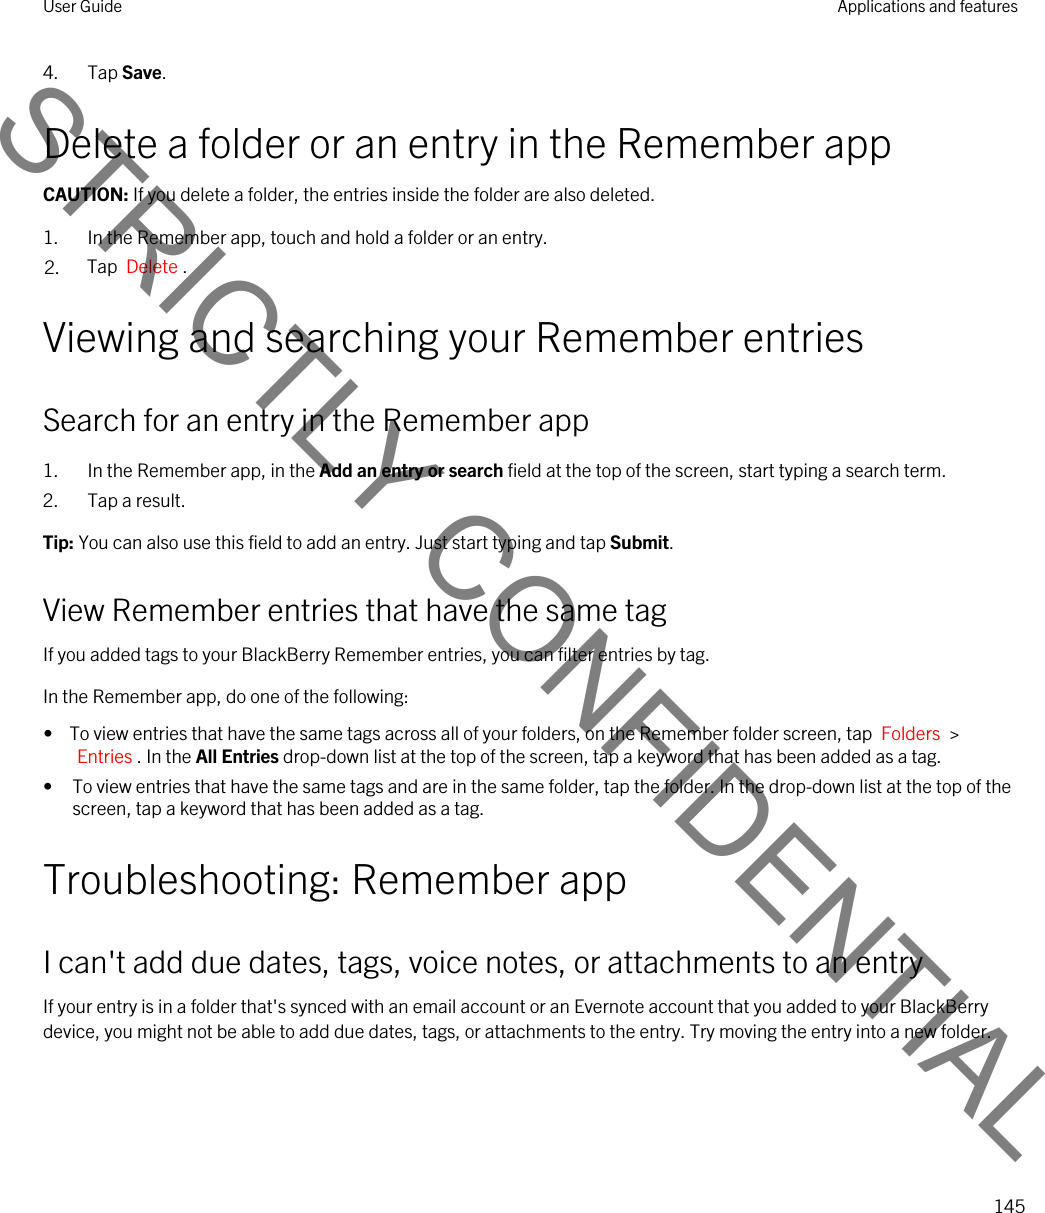 4. Tap Save.Delete a folder or an entry in the Remember appCAUTION: If you delete a folder, the entries inside the folder are also deleted.1. In the Remember app, touch and hold a folder or an entry.2. Tap  Delete .Viewing and searching your Remember entriesSearch for an entry in the Remember app1. In the Remember app, in the Add an entry or search field at the top of the screen, start typing a search term.2. Tap a result.Tip: You can also use this field to add an entry. Just start typing and tap Submit.View Remember entries that have the same tagIf you added tags to your BlackBerry Remember entries, you can filter entries by tag.In the Remember app, do one of the following:•  To view entries that have the same tags across all of your folders, on the Remember folder screen, tap  Folders  &gt; Entries . In the All Entries drop-down list at the top of the screen, tap a keyword that has been added as a tag.• To view entries that have the same tags and are in the same folder, tap the folder. In the drop-down list at the top of the screen, tap a keyword that has been added as a tag.Troubleshooting: Remember appI can&apos;t add due dates, tags, voice notes, or attachments to an entryIf your entry is in a folder that&apos;s synced with an email account or an Evernote account that you added to your BlackBerry device, you might not be able to add due dates, tags, or attachments to the entry. Try moving the entry into a new folder.User Guide Applications and features145STRICTLY CONFIDENTIAL